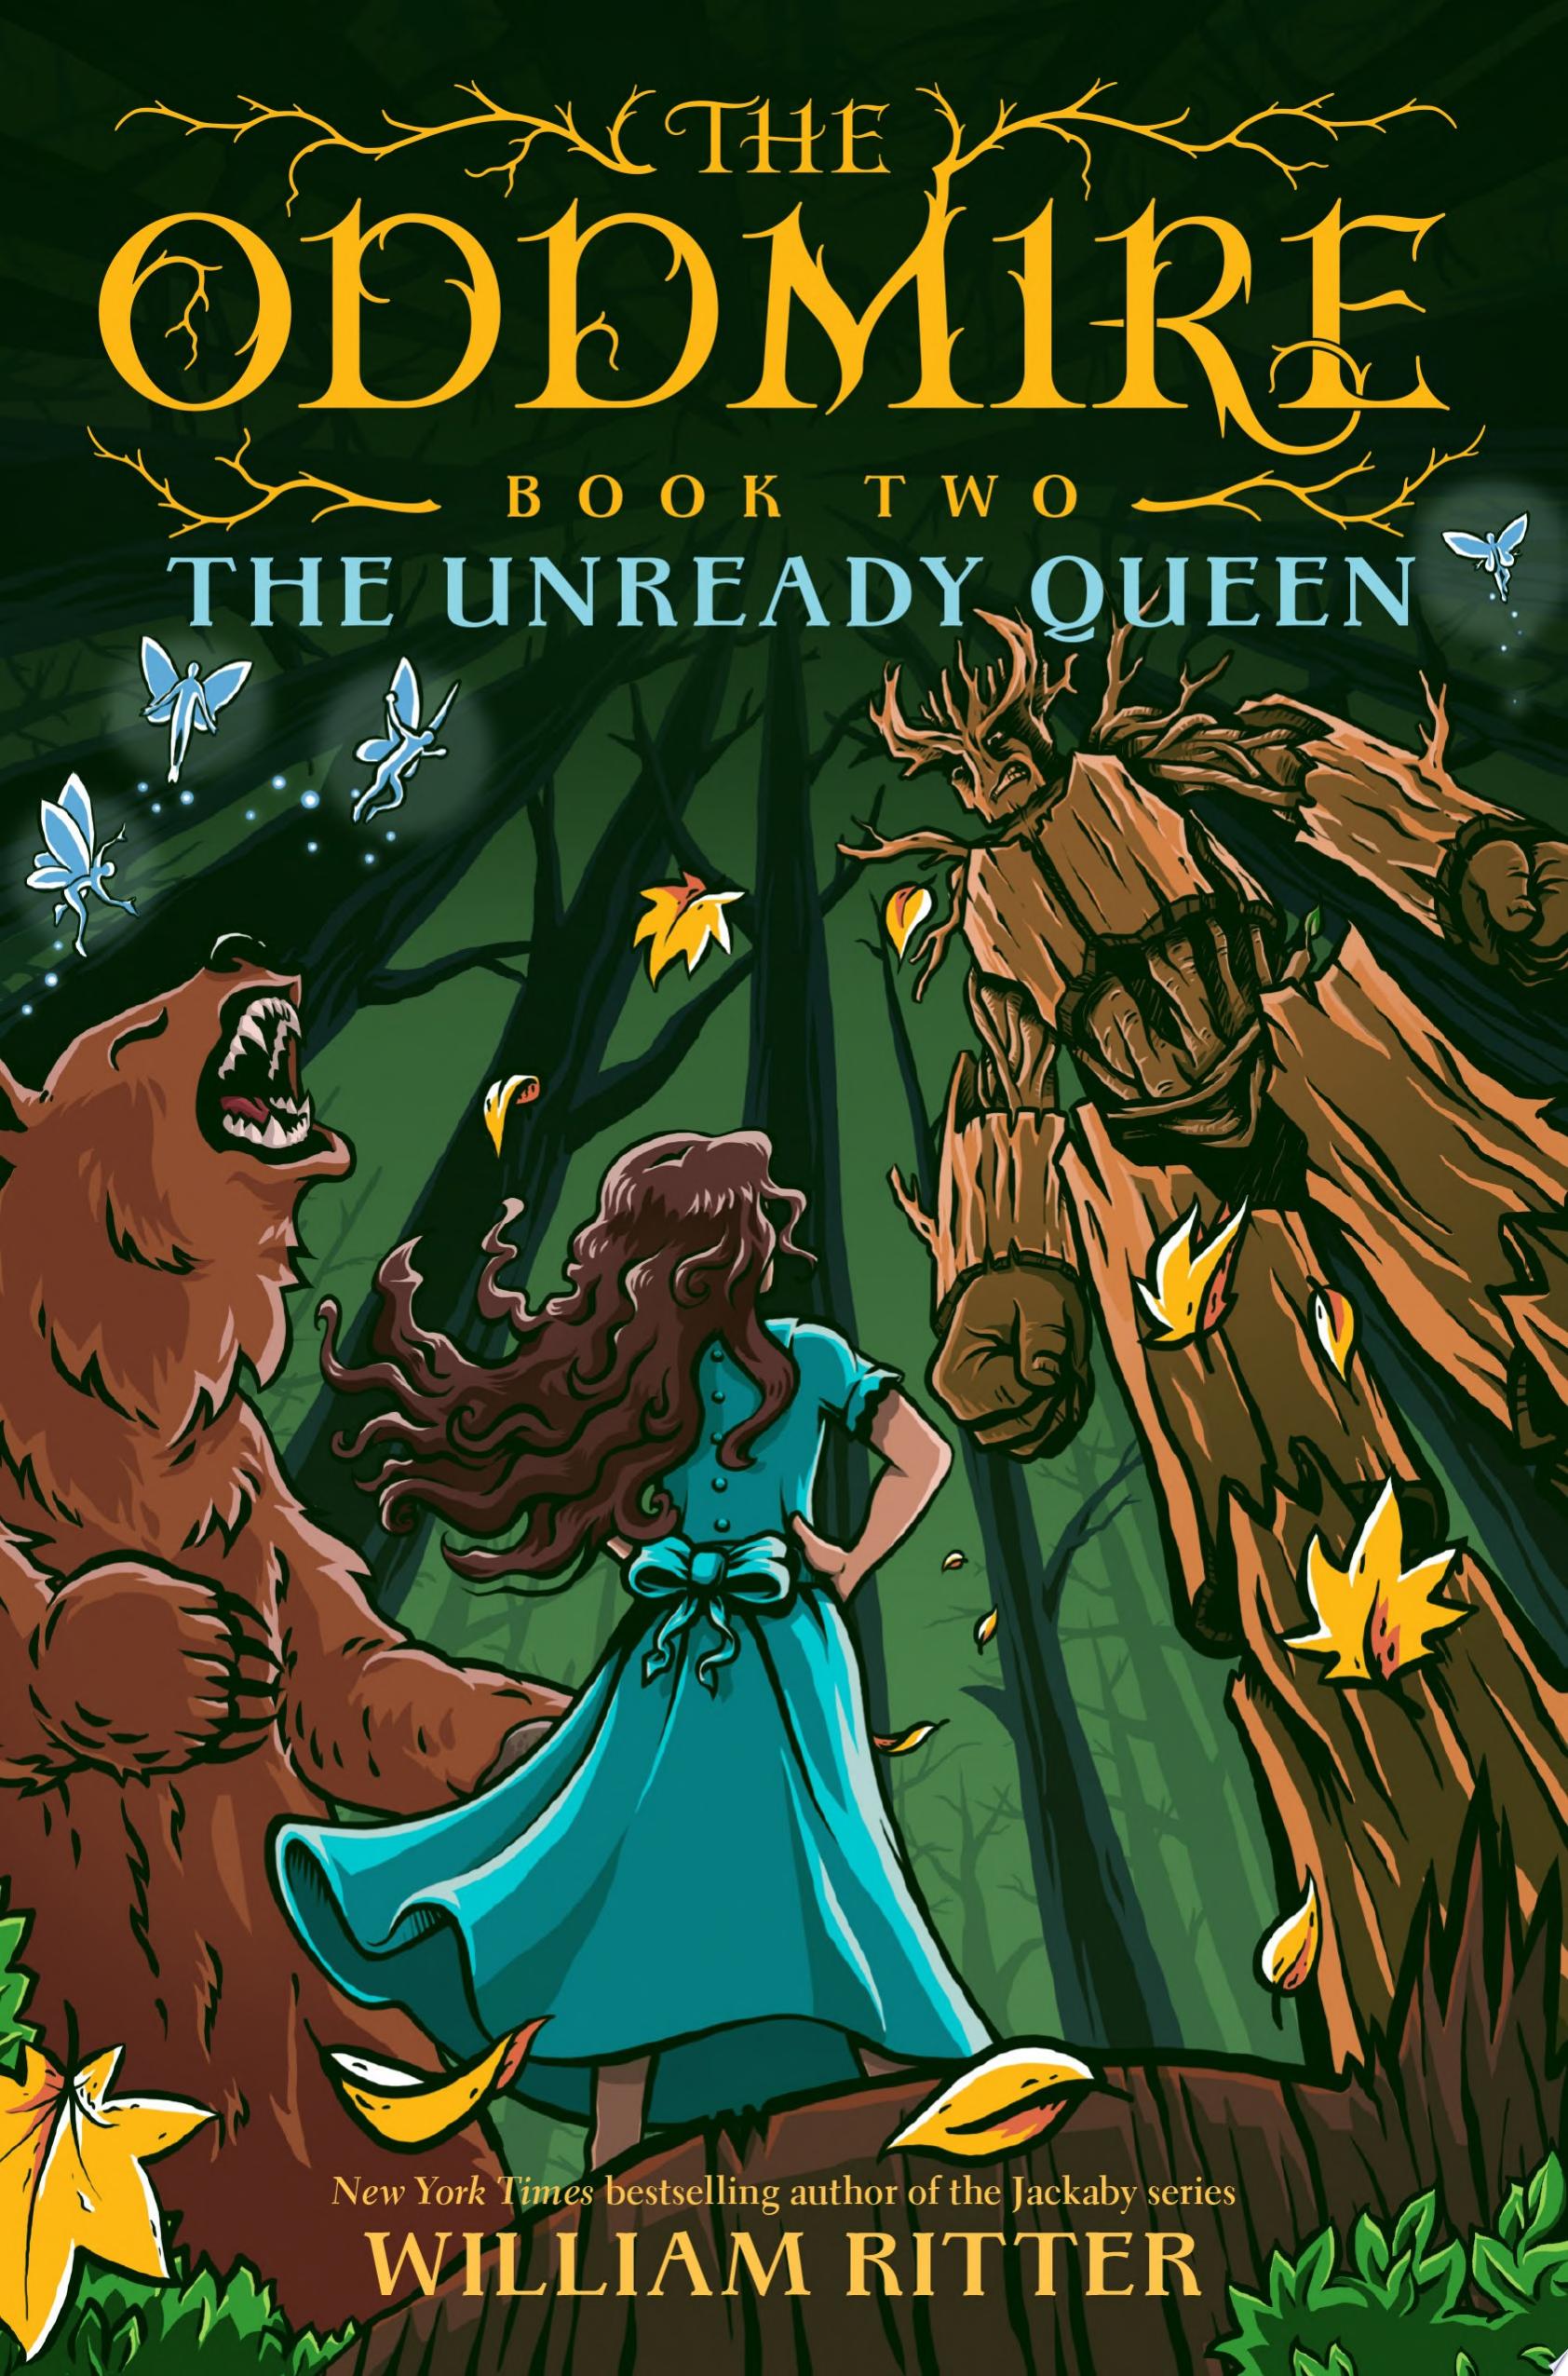 Image for "The Oddmire, Book 2: The Unready Queen"